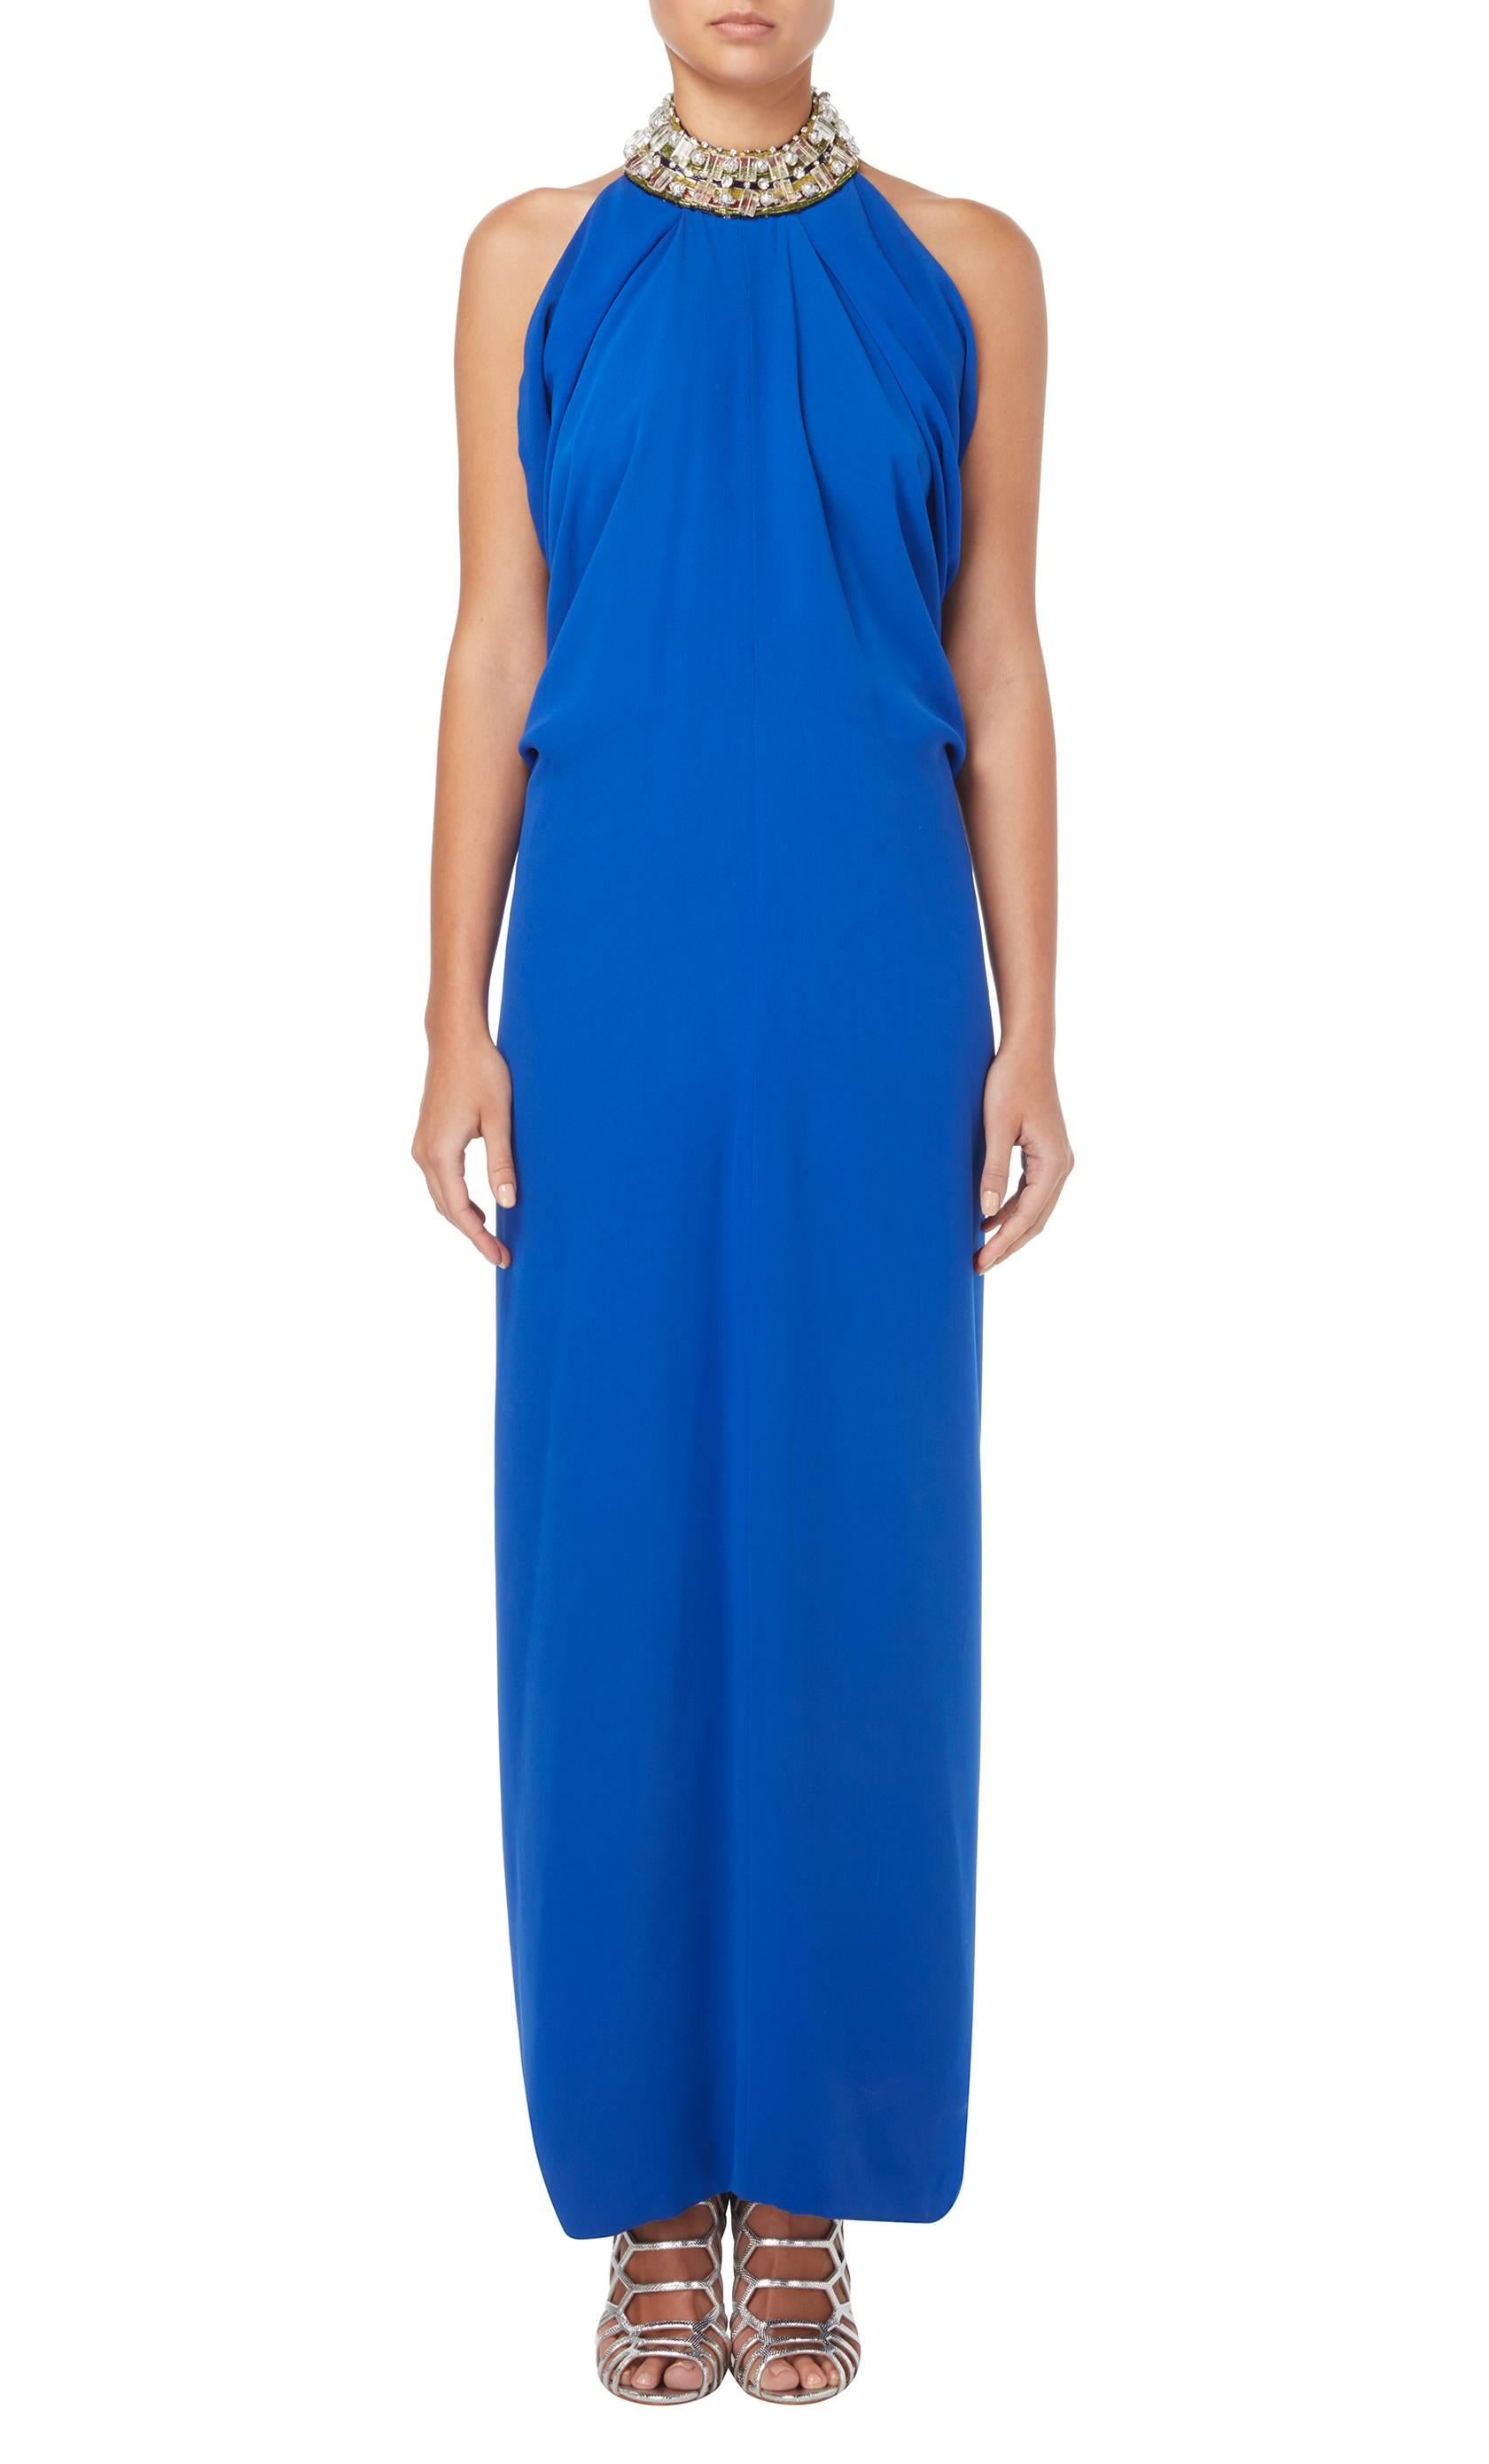 This haute couture gown by Pierre Cardin is simply stunning and will make a for a bold red carpet look. The bright blue silk crepe is expertly draped over the bust and waist and is gathered with an elasticated waistline to the rear. The halter neck